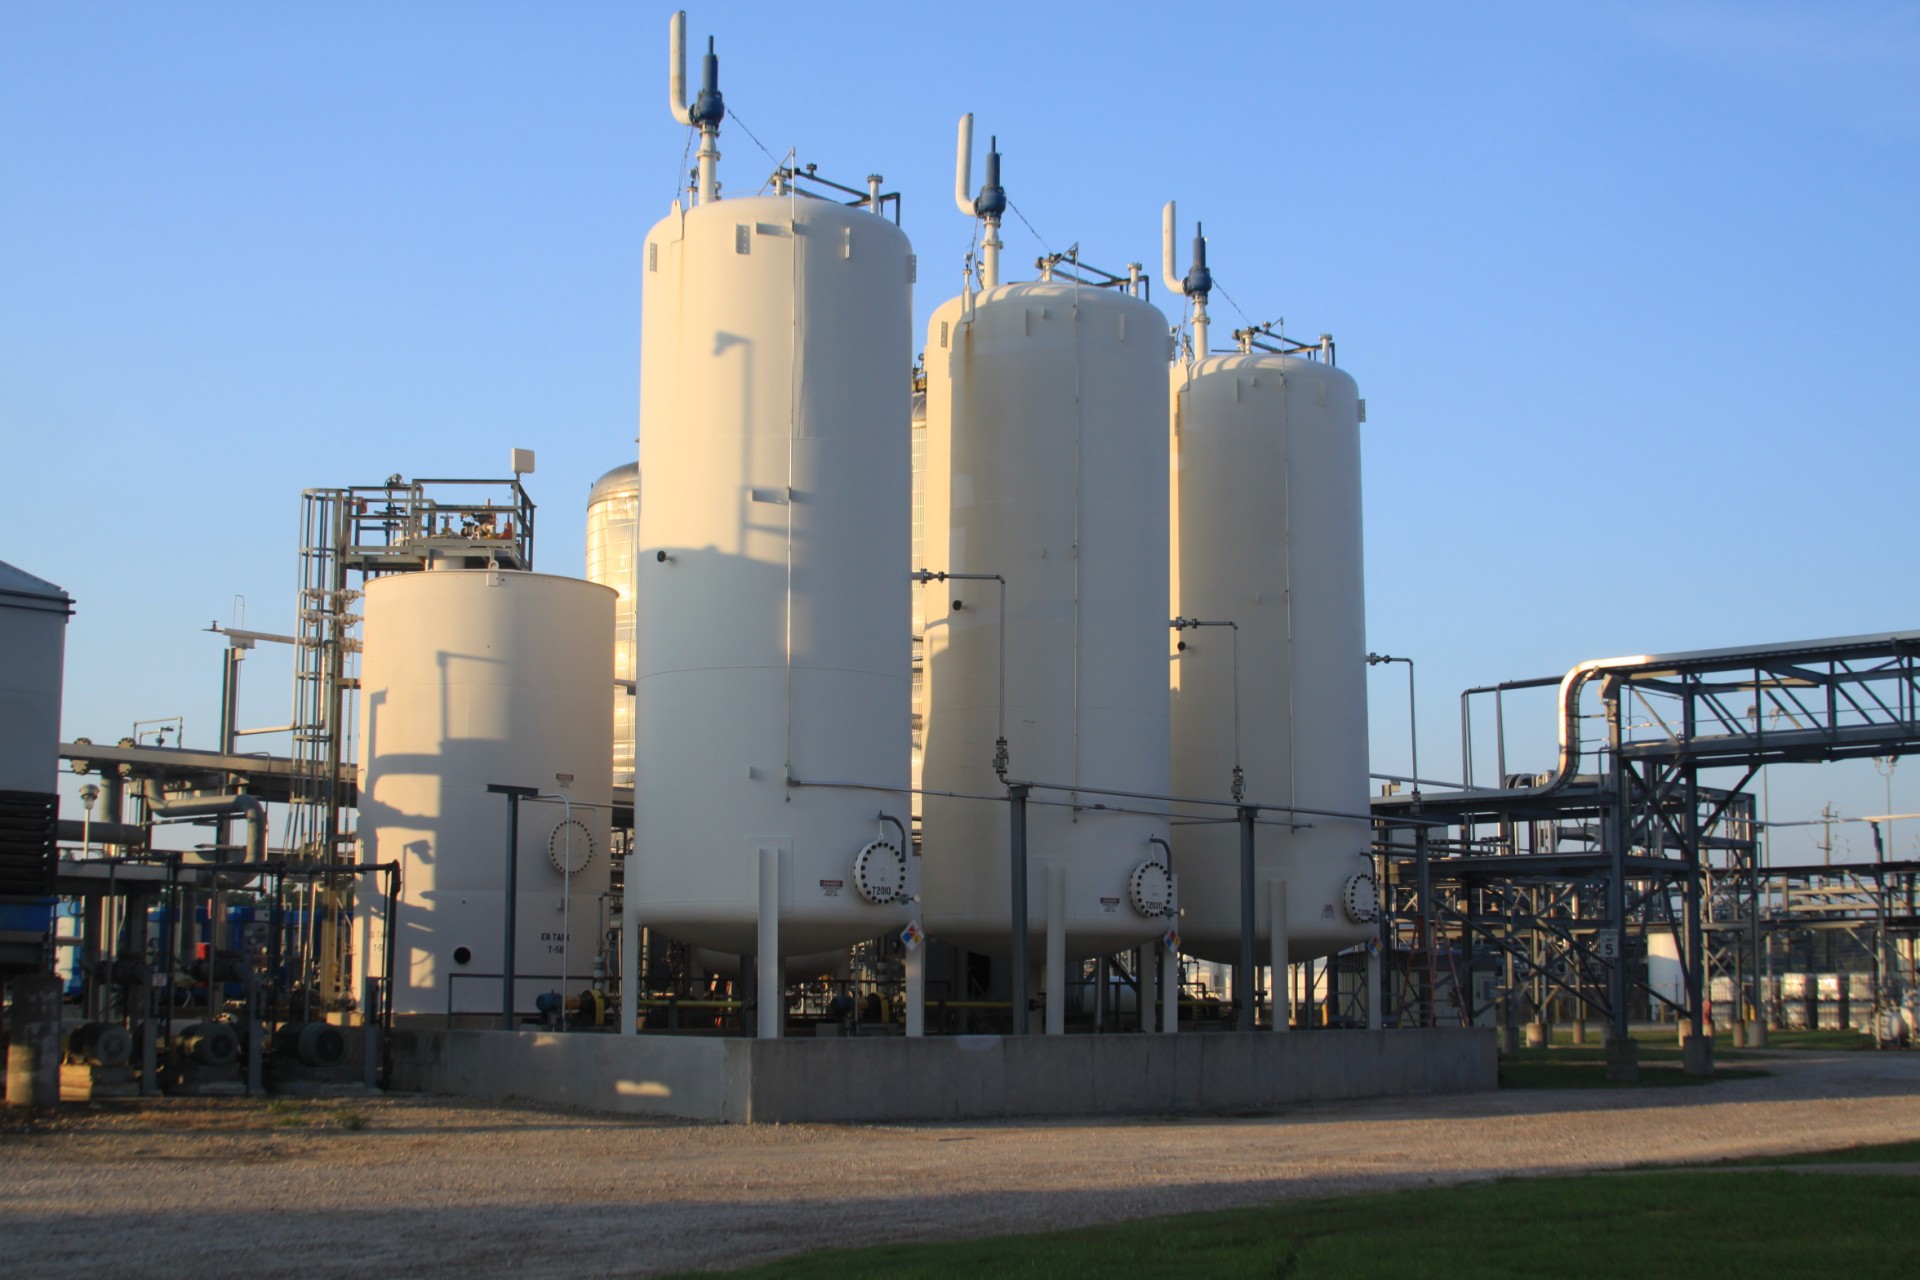 Monument Chemical Expands Capabilities in Custom Manufacturing by Acquiring Nova Molecular Technologies’ Bayport, Texas Facility